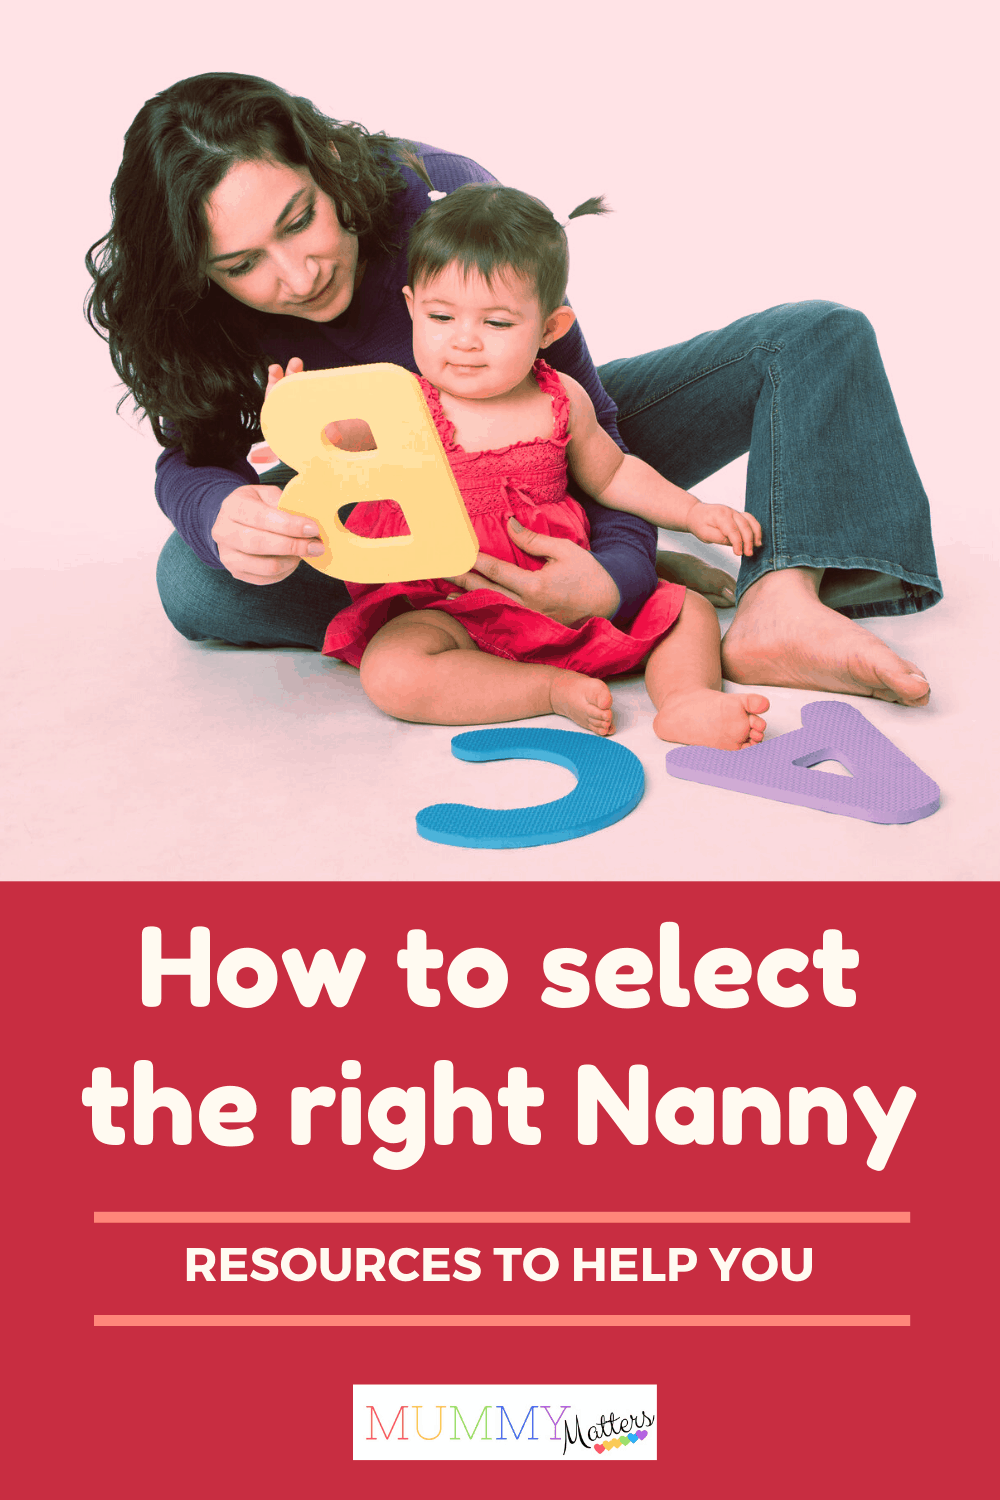 Finding the right nanny is not an easy task, they will be in direct contact with your kids. Here we discuss some of the resources to make your task easier.